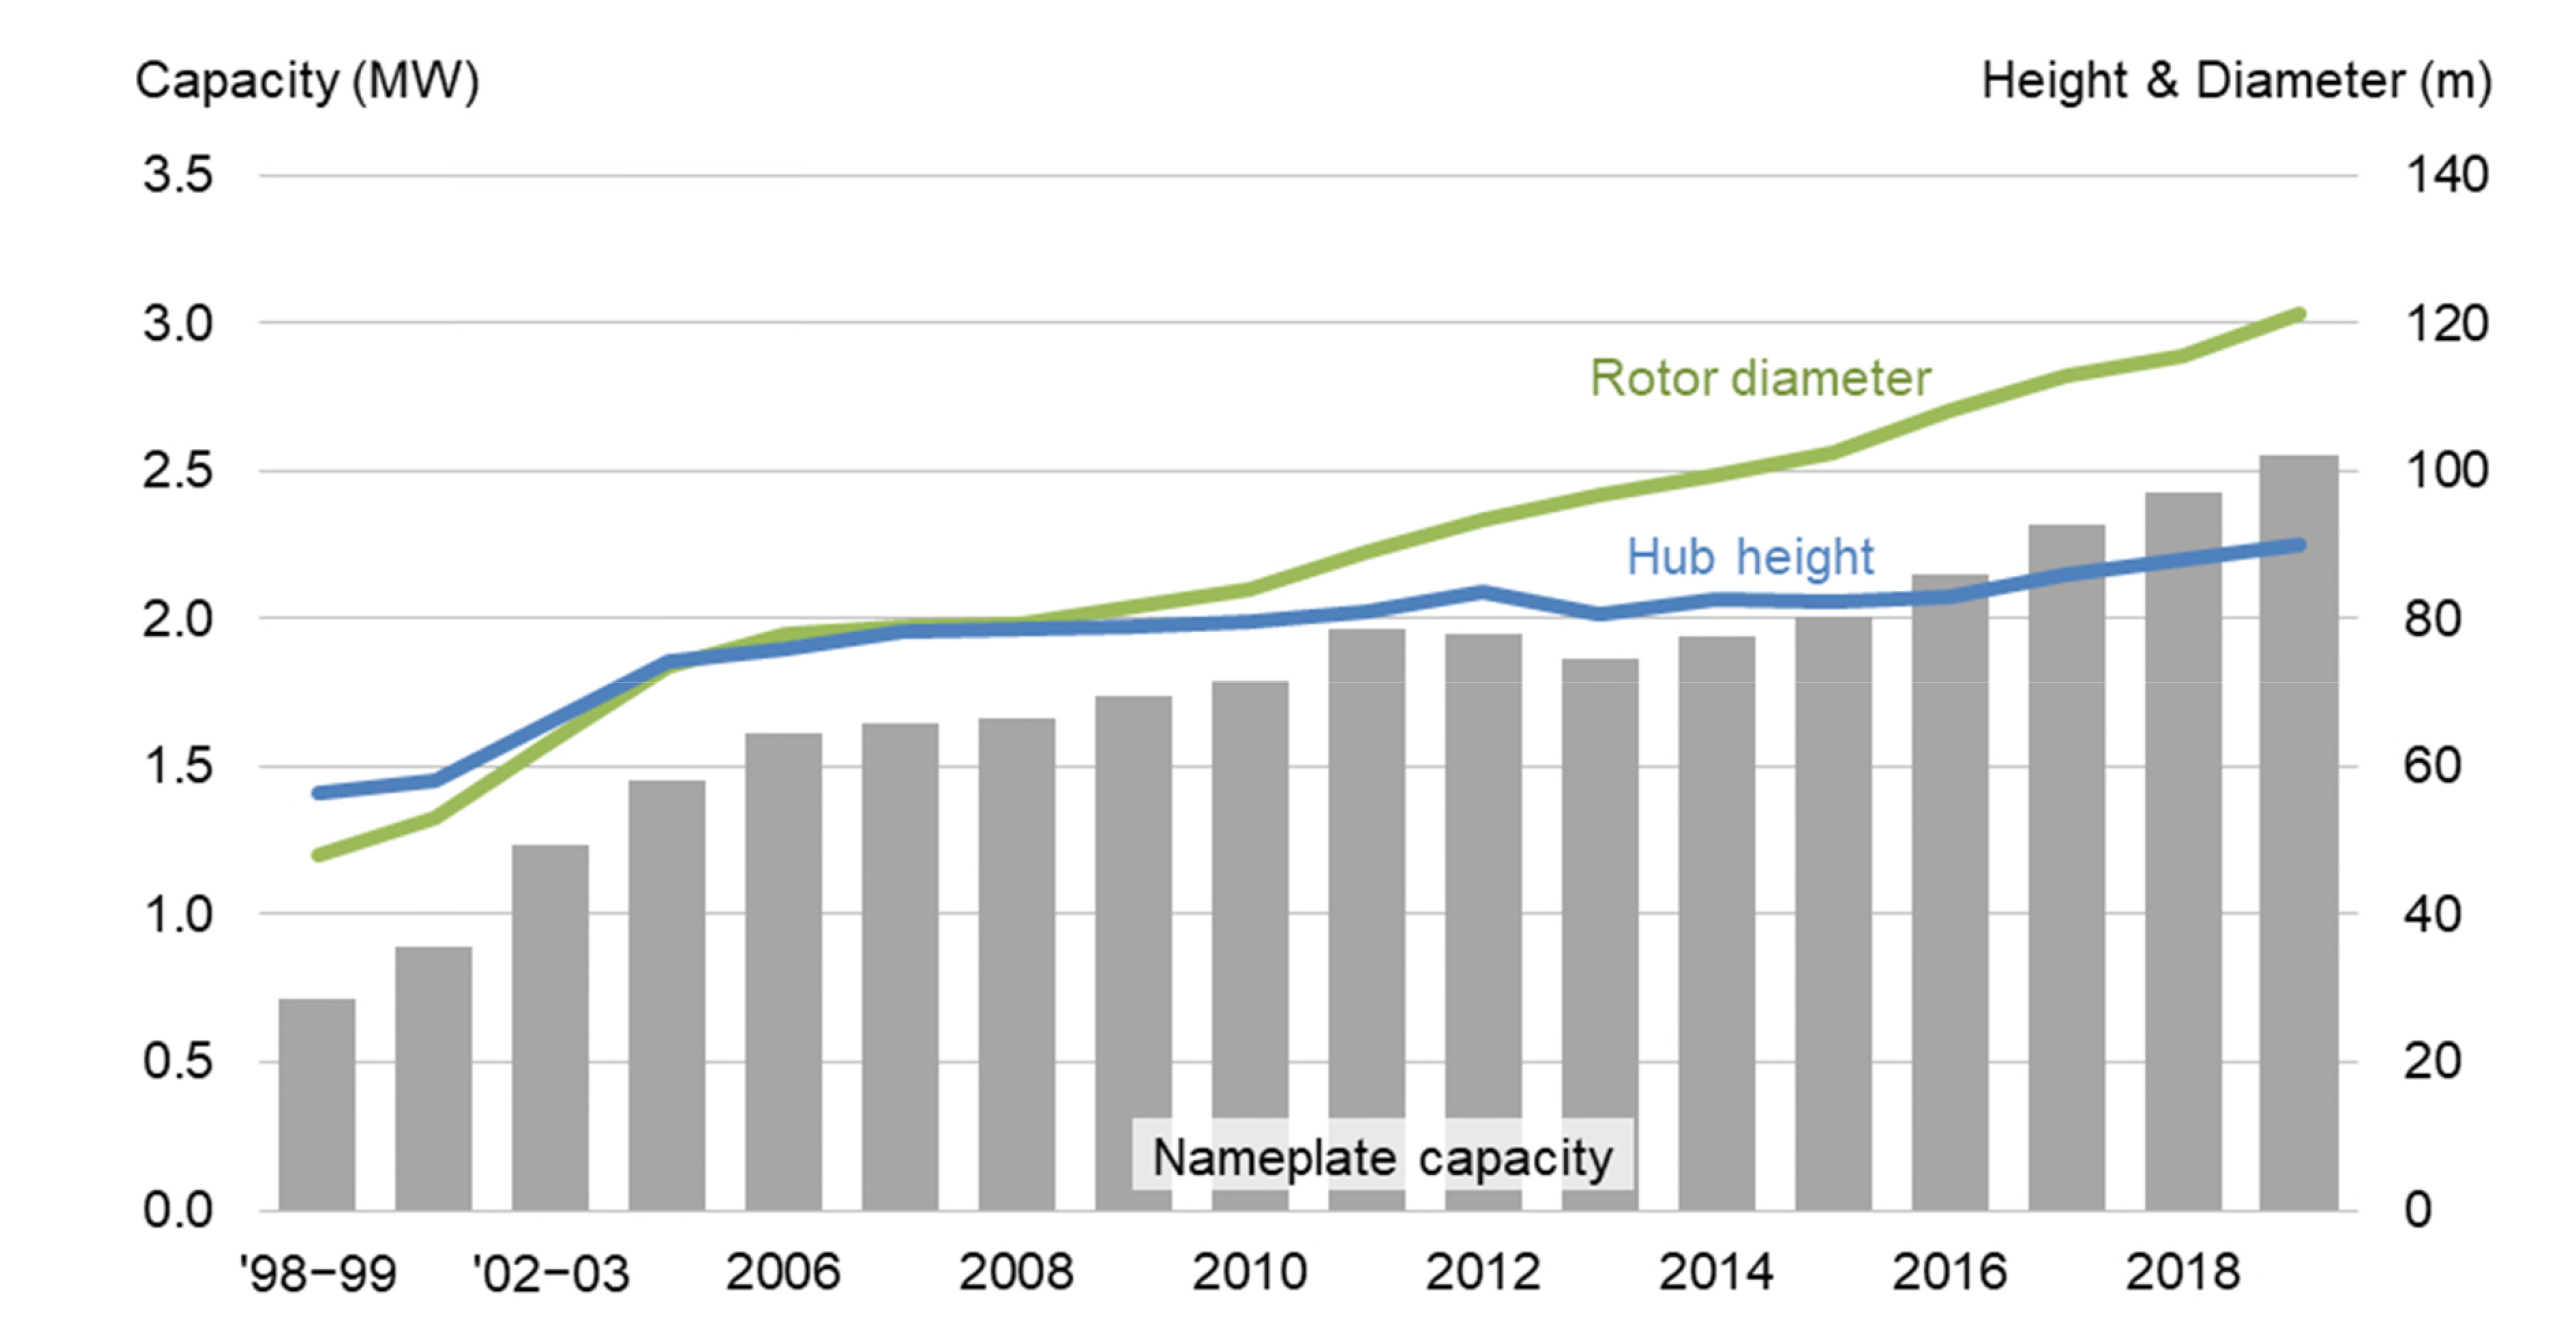 Average nameplate capacity, hub height, and rotor diameter for land-based wind from 1998 to 2019.